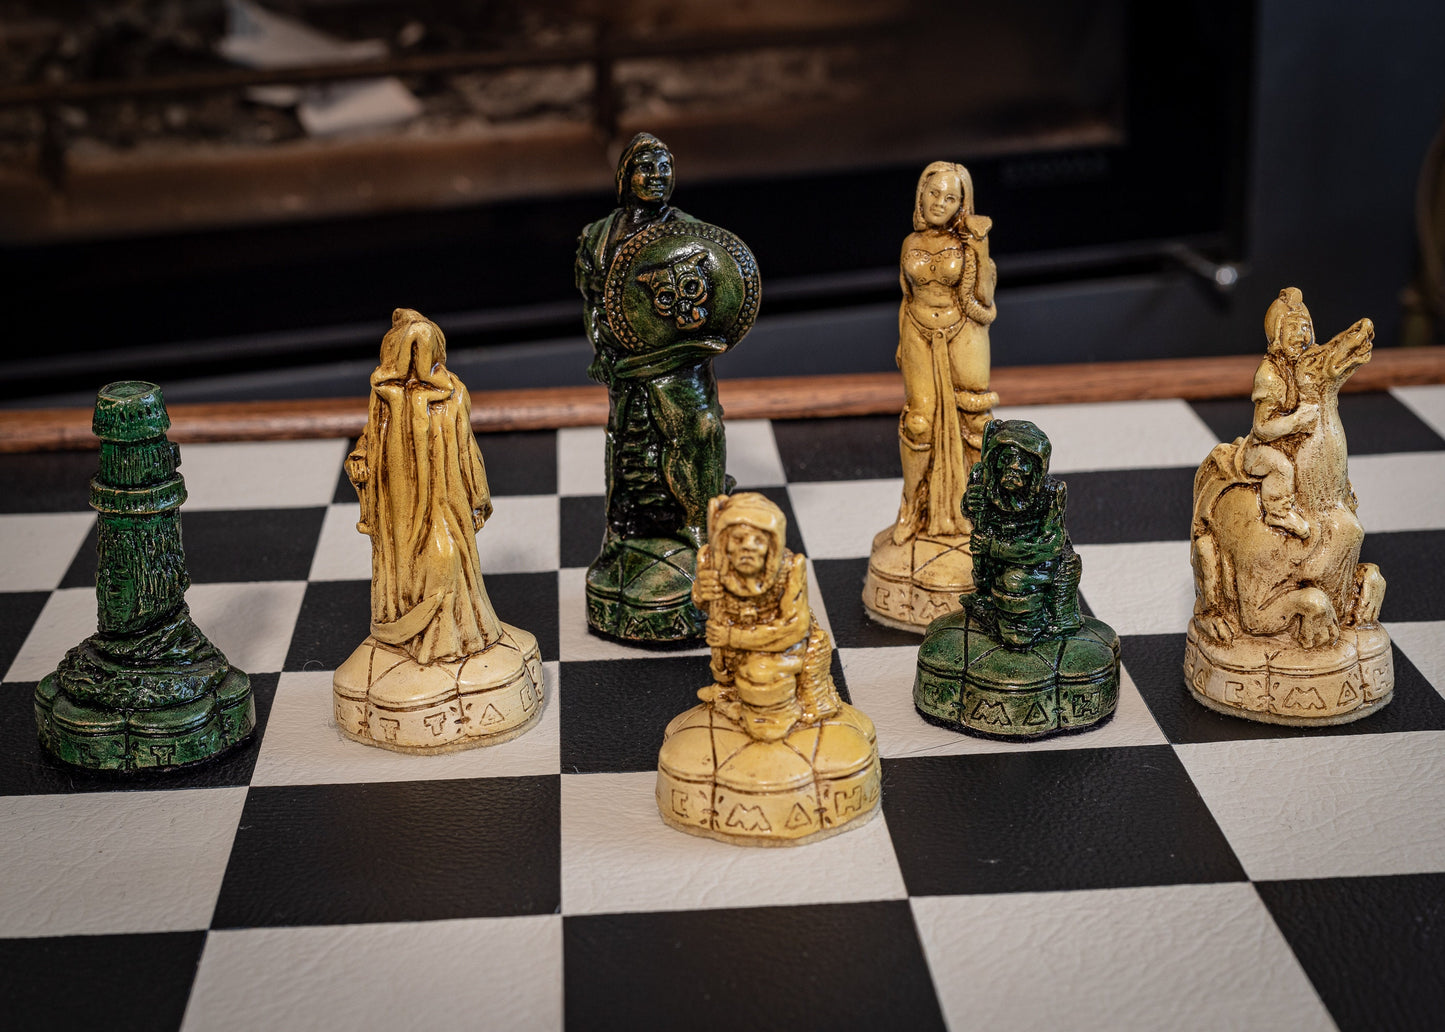 Made to Order Chess Set Fantasy Warlord Design in an Aged 